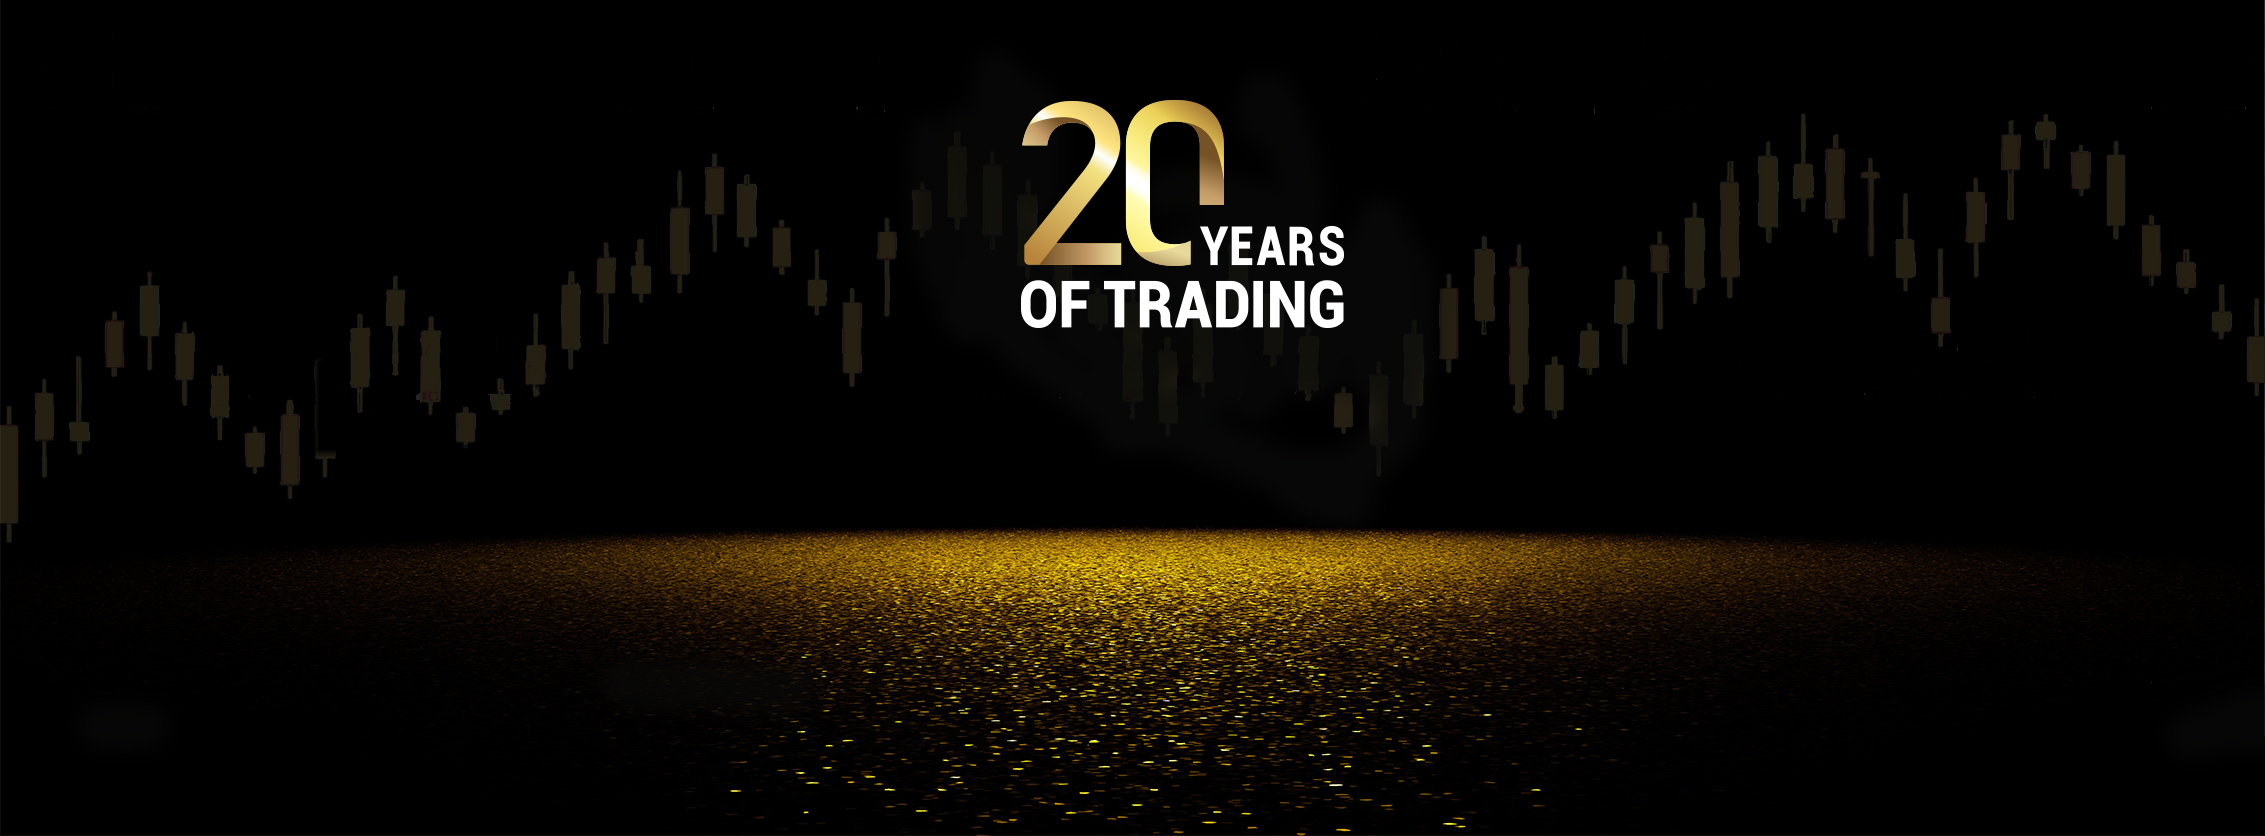 20 Years of Trading - FXCM Markets